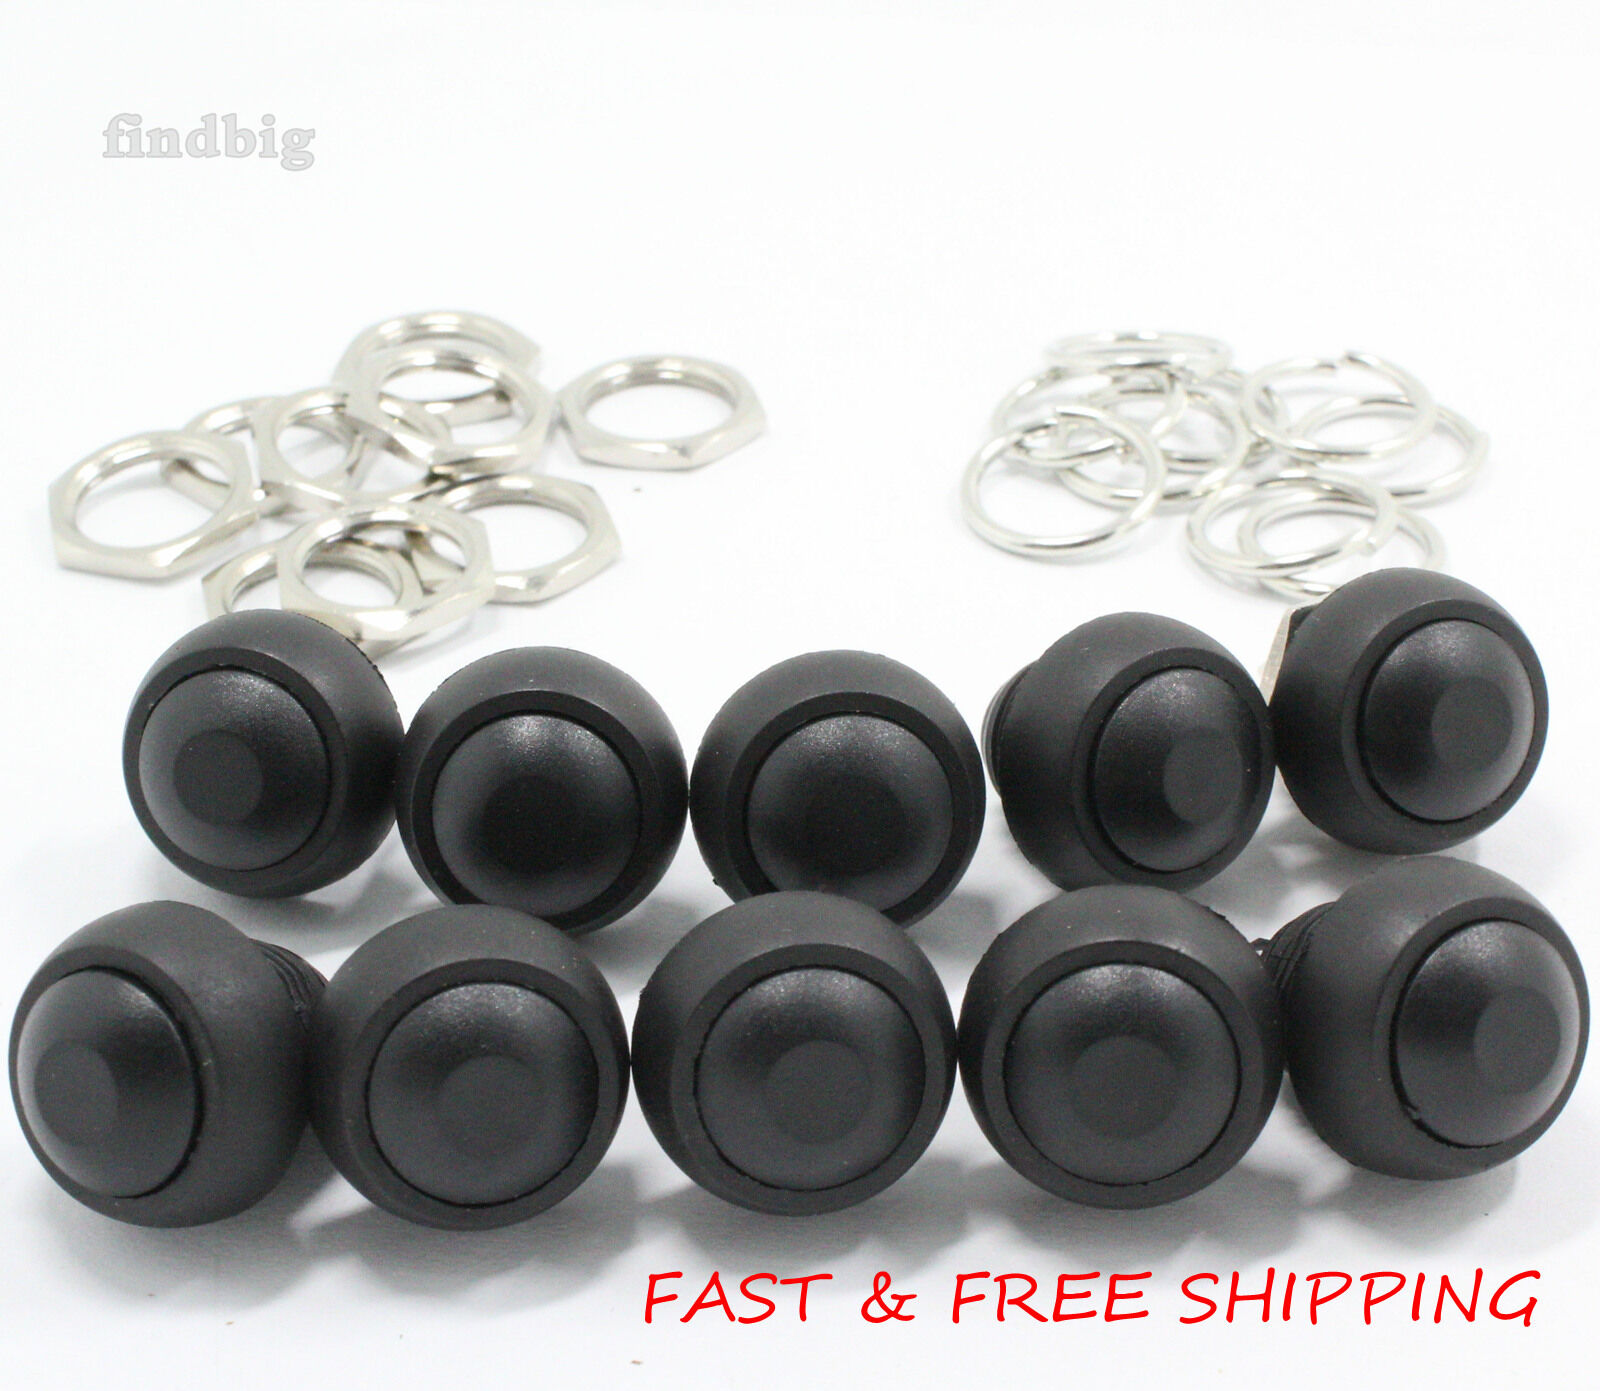 Momentary ON/OFF Push Button Switch Waterproof 12mm Black M122 Mini 10pcs Universal/generic Does Not Apply